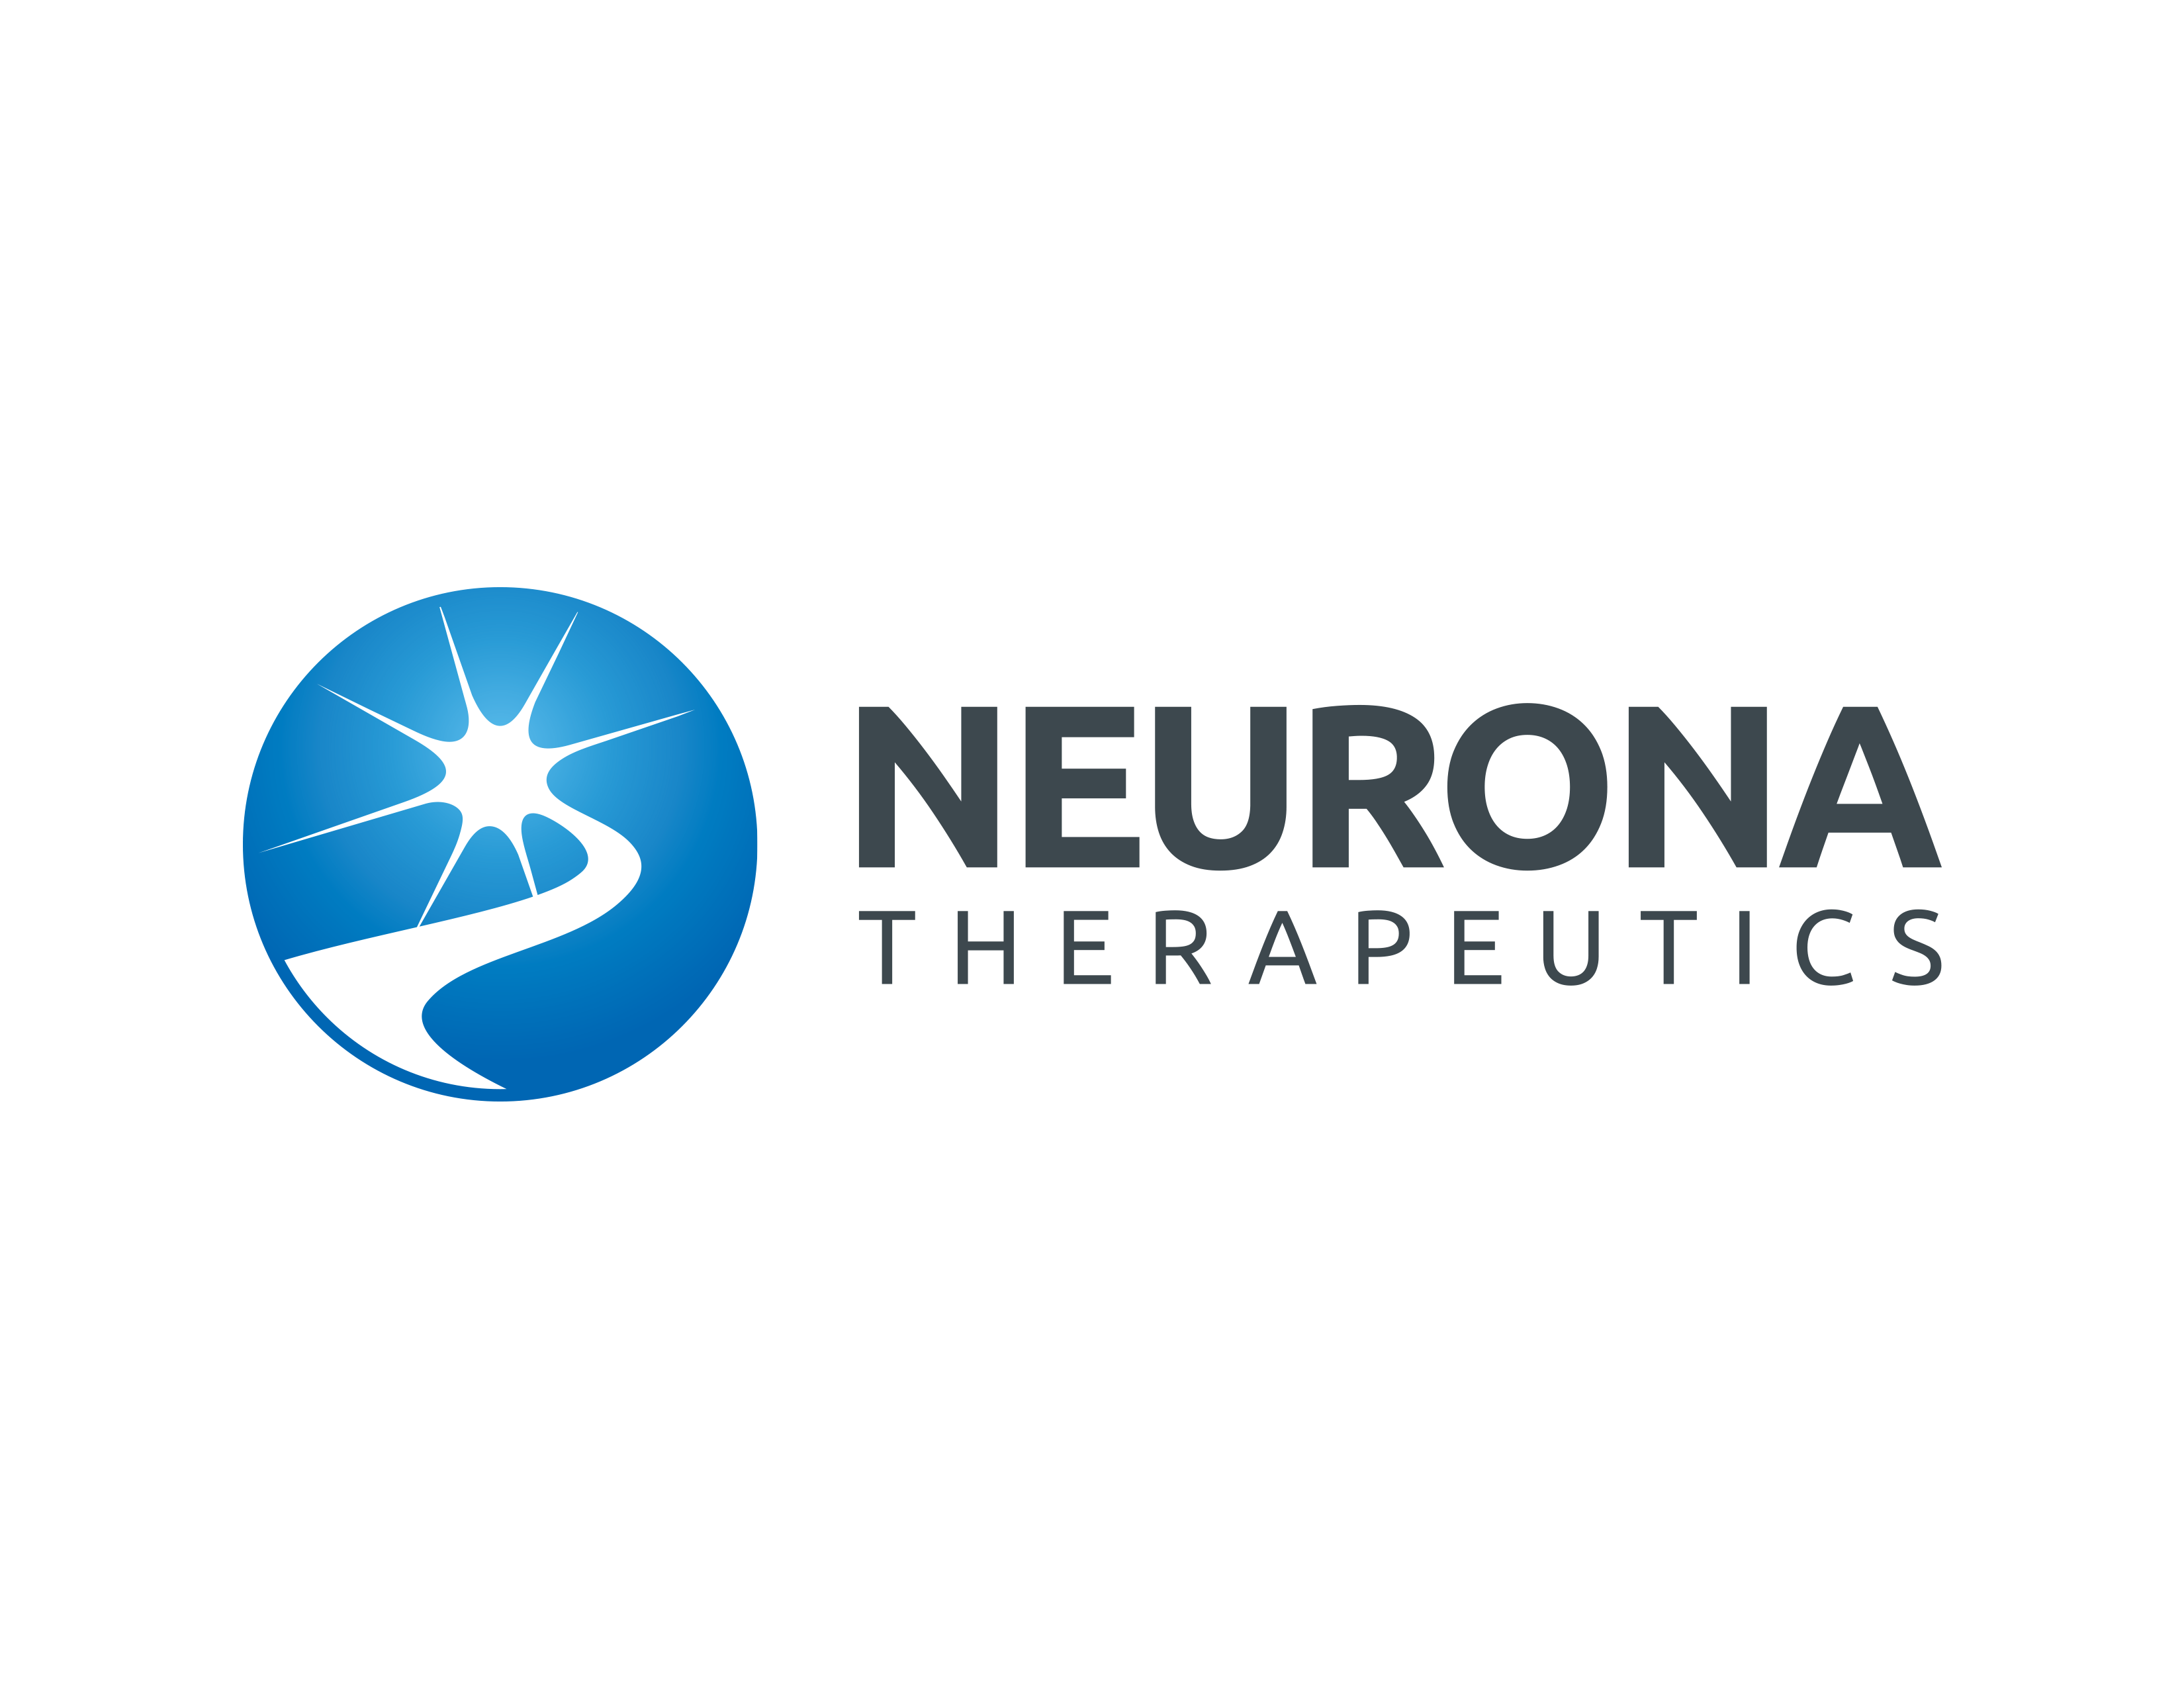 Neurona Therapeutics Presents Preclinical Data at the American Academy of Neurology (AAN) Annual Meeting from Lead Cell Therapy Candidate, NRTX-1001, Being Evaluated in a Phase 1/2 Clinical Trial for Chronic Focal Epilepsy